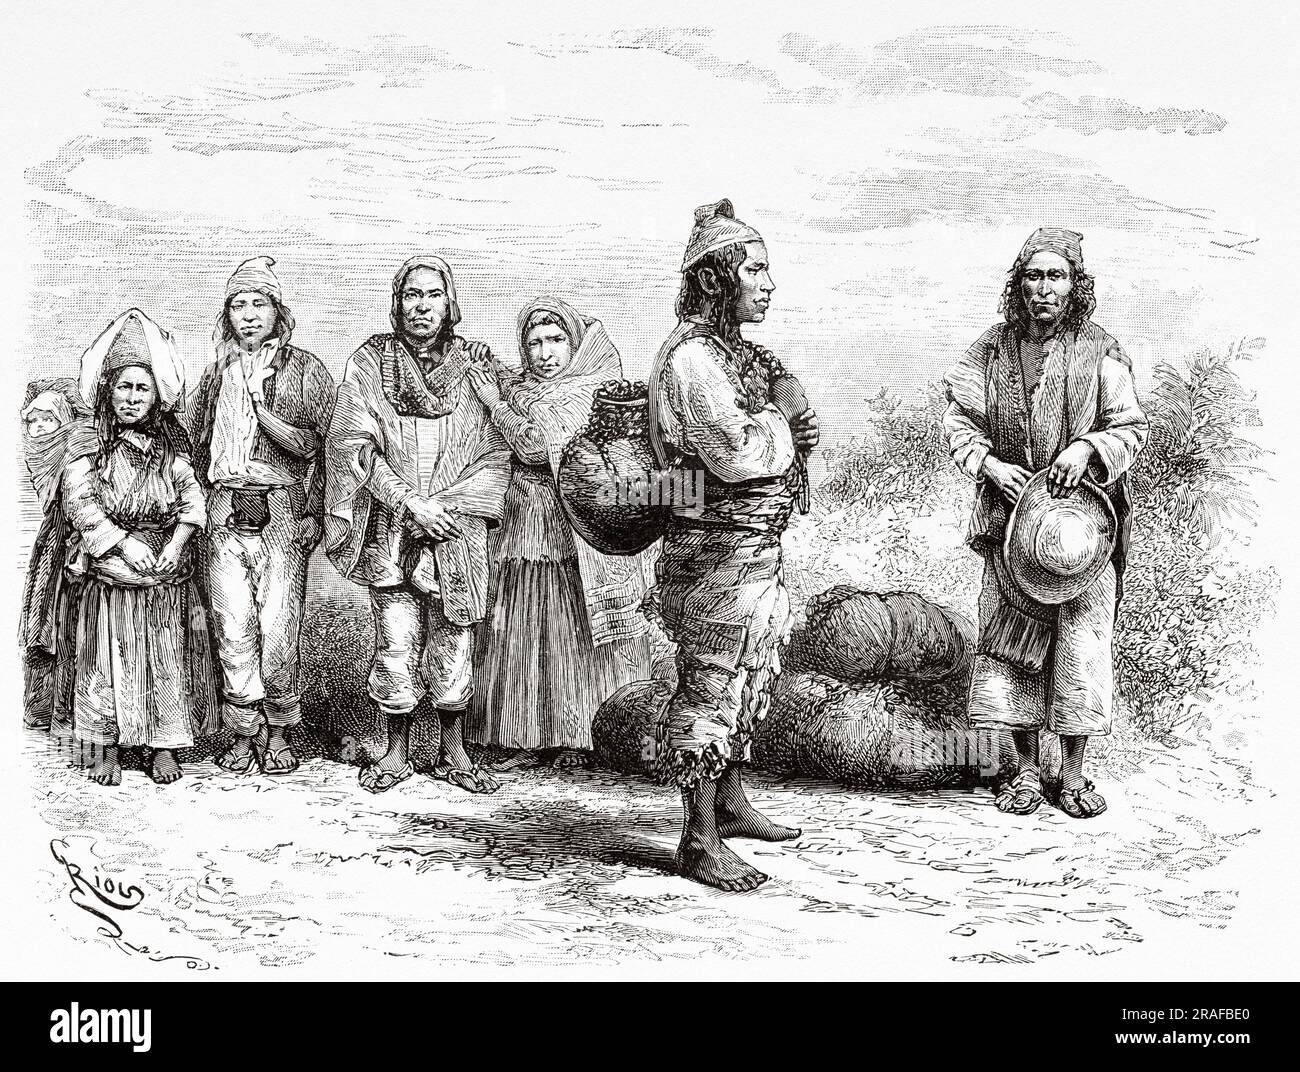 Aymara and Quechua Indians of the Bolivian city of La Paz, Bolivia, South America. Journey in search of the remains of the Crevaux mission by Émile-Arthur Thouar 1884. Old 19th century engraving from Le Tour du Monde 1906 Stock Photo